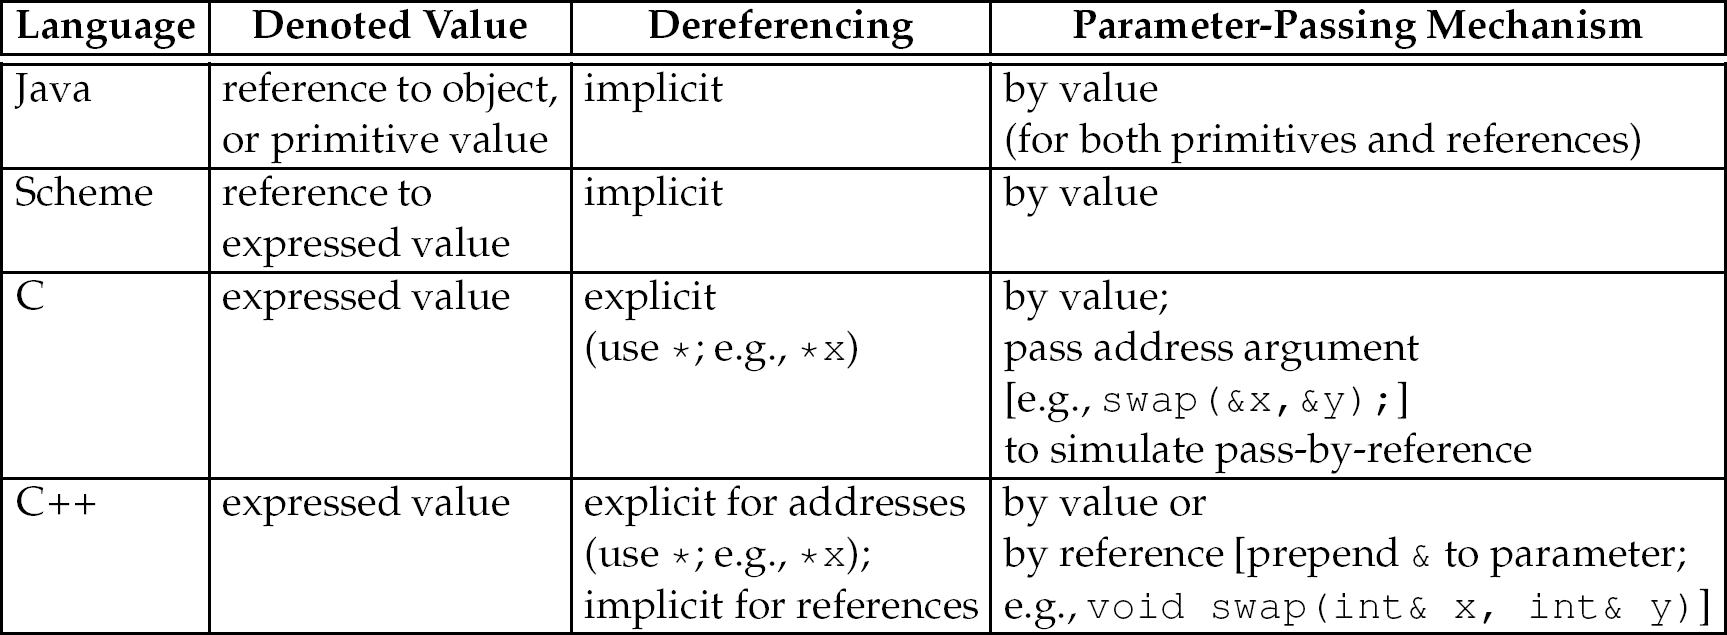 A table of denoted value, dereferencing, and parameter-passing mechanism for different languages.